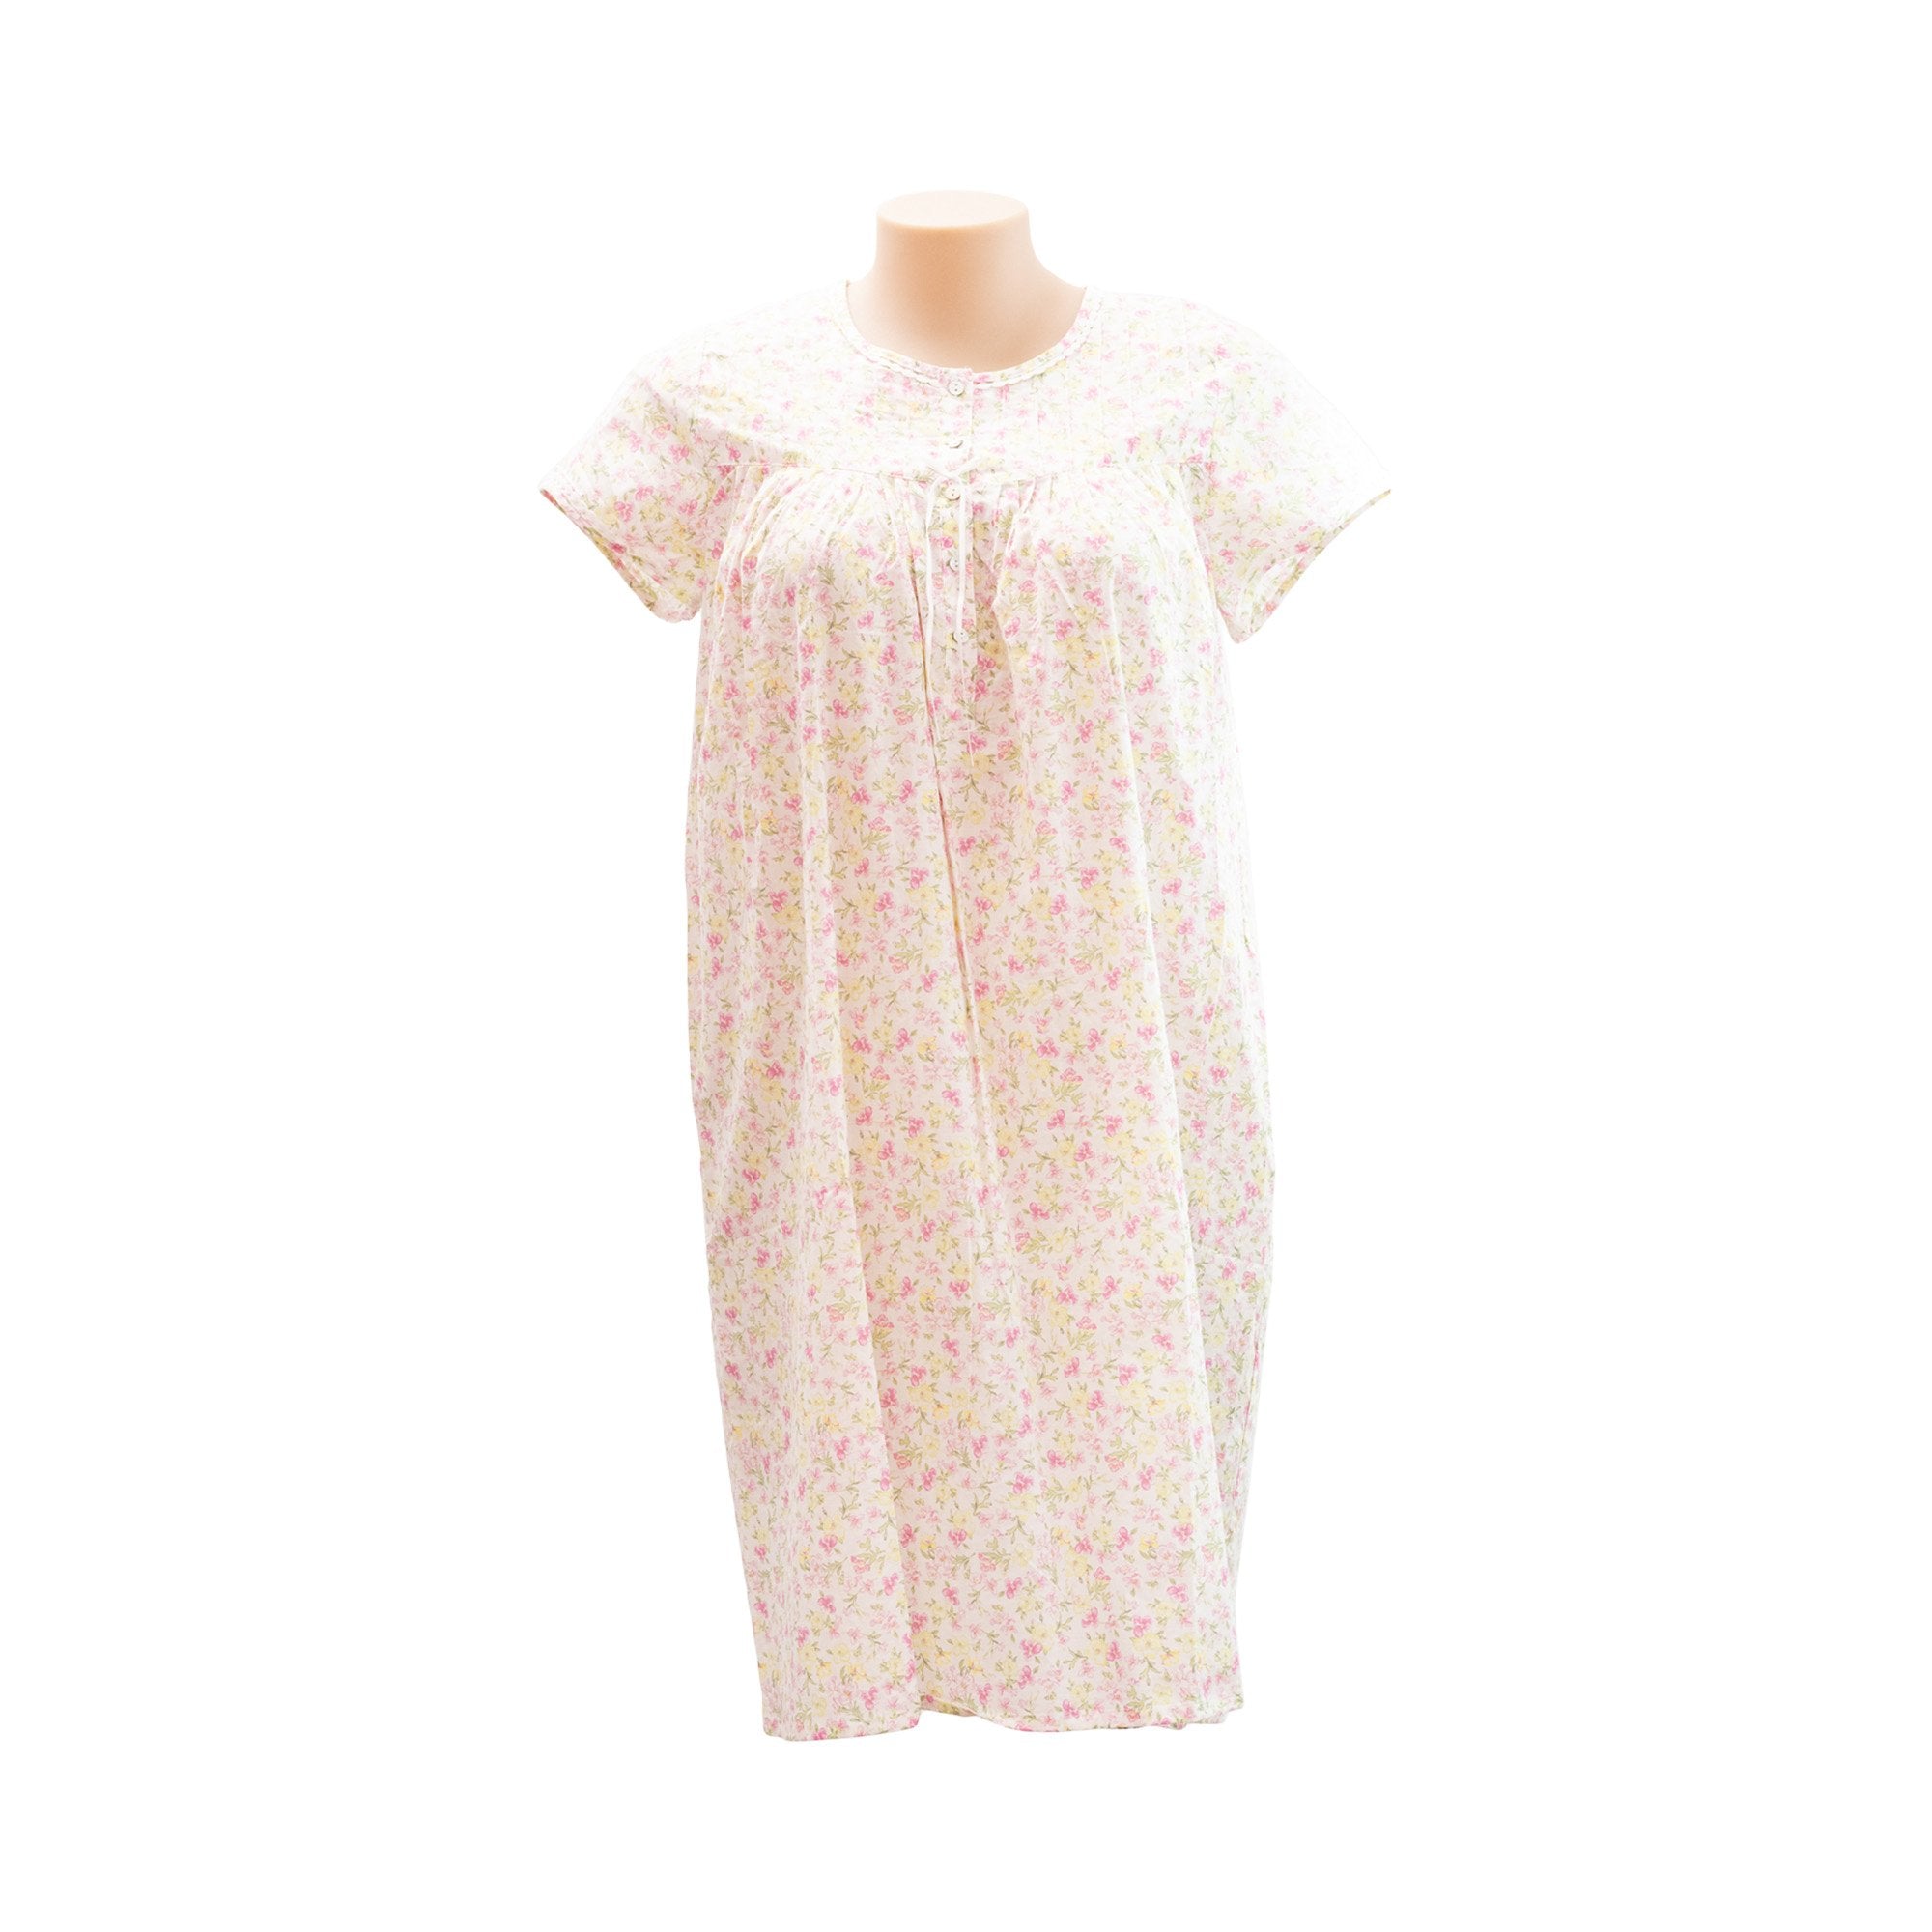 Schrank Cotton Floral Nightie SK212 - Nighties Pink / 10 / S  Available at Illusions Lingerie